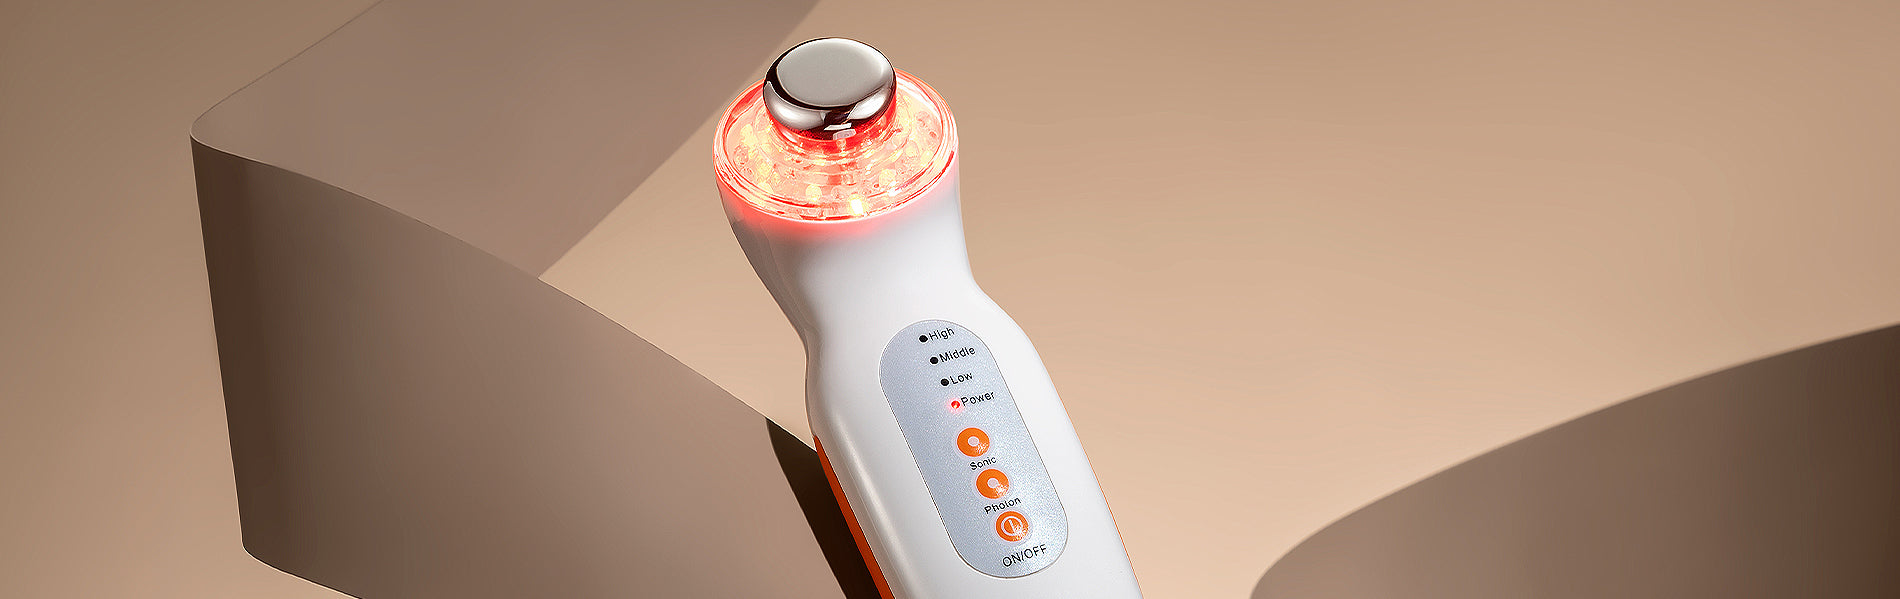 Bring the beauty clinic to your bathroom from LED to EMS